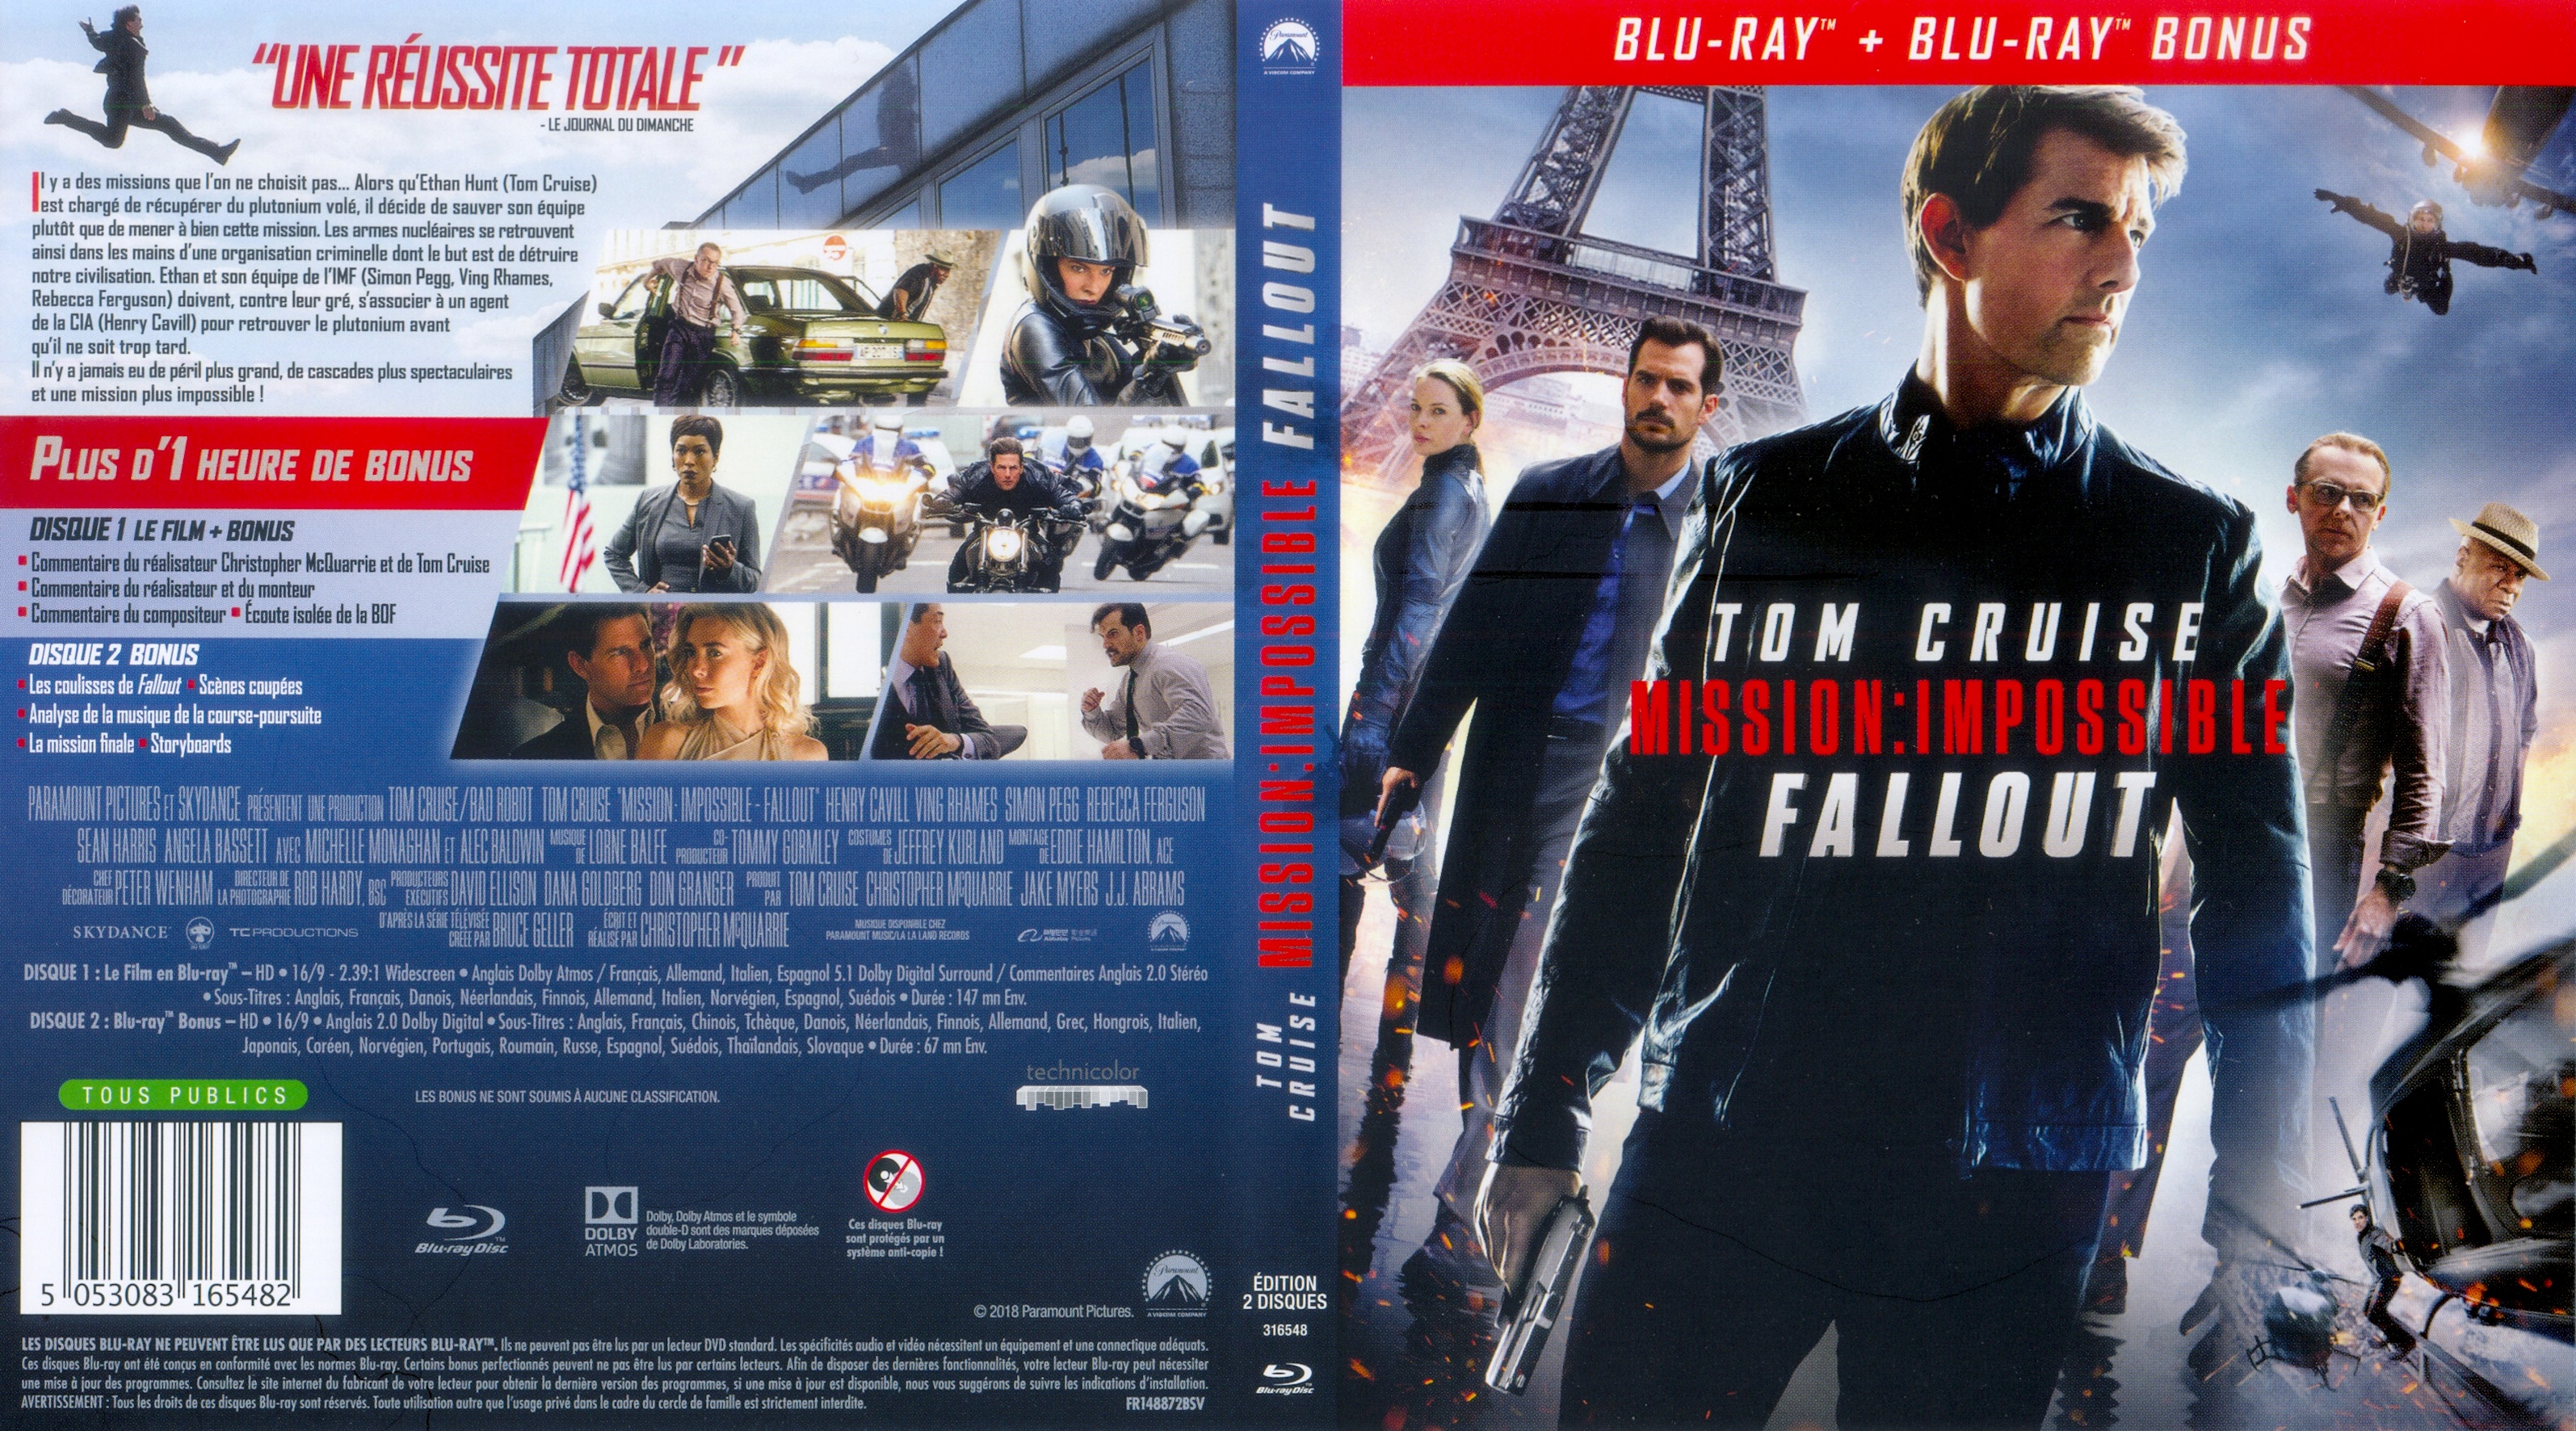 Jaquette DVD Mission Impossible Fallout (BLU-RAY)